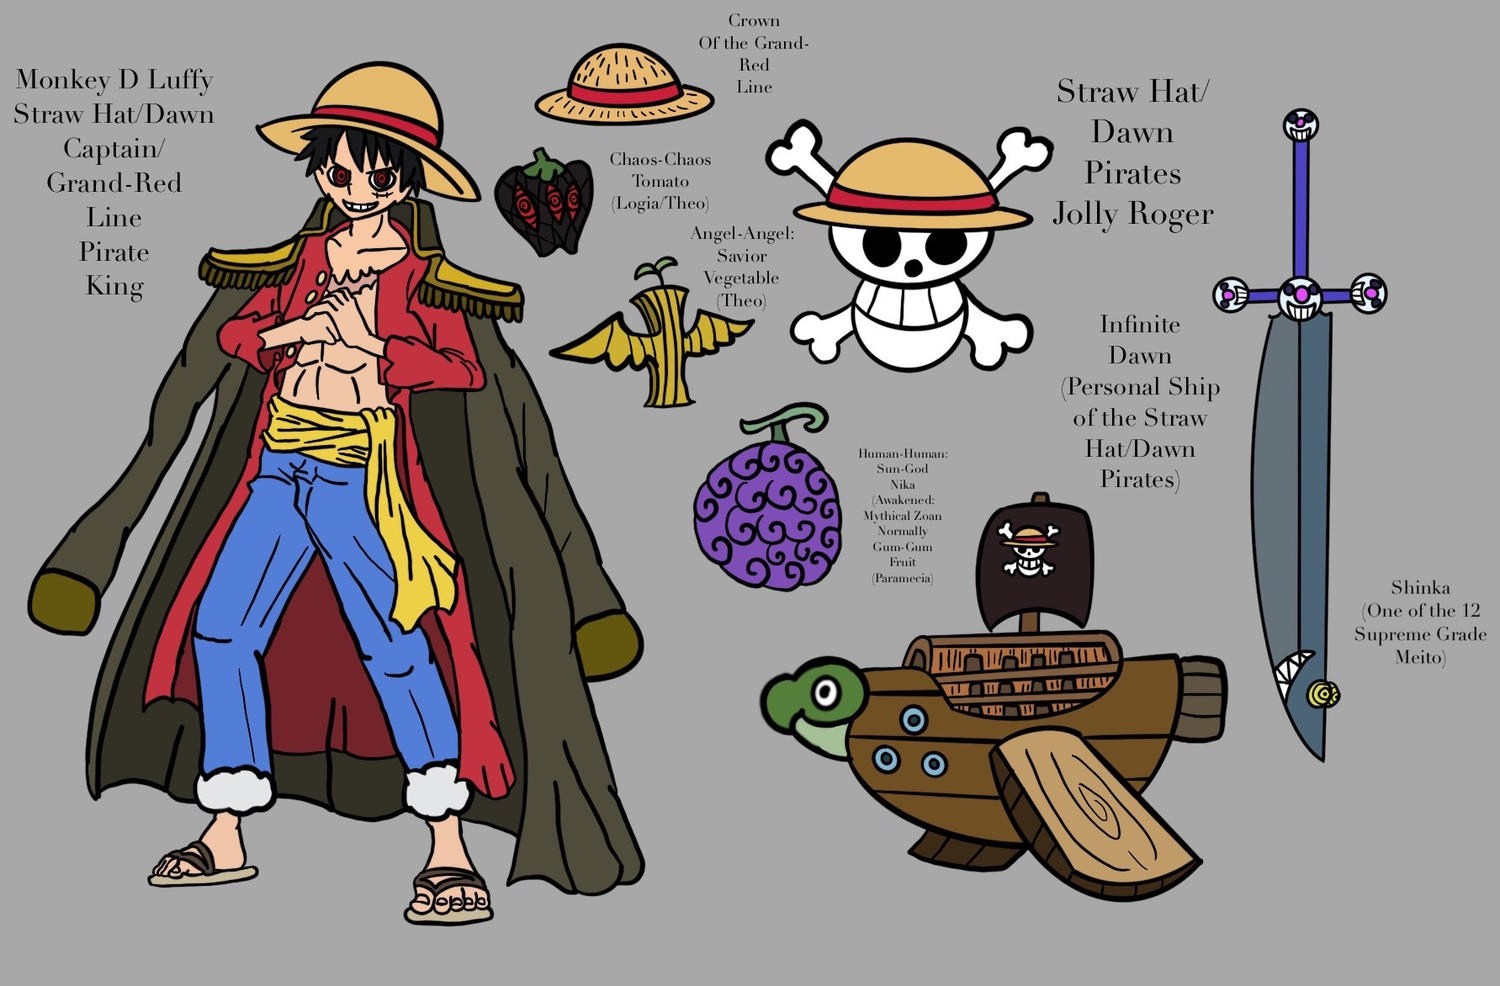 Monkey D. Luffy- Gears 2 and 3 by Nectp on DeviantArt